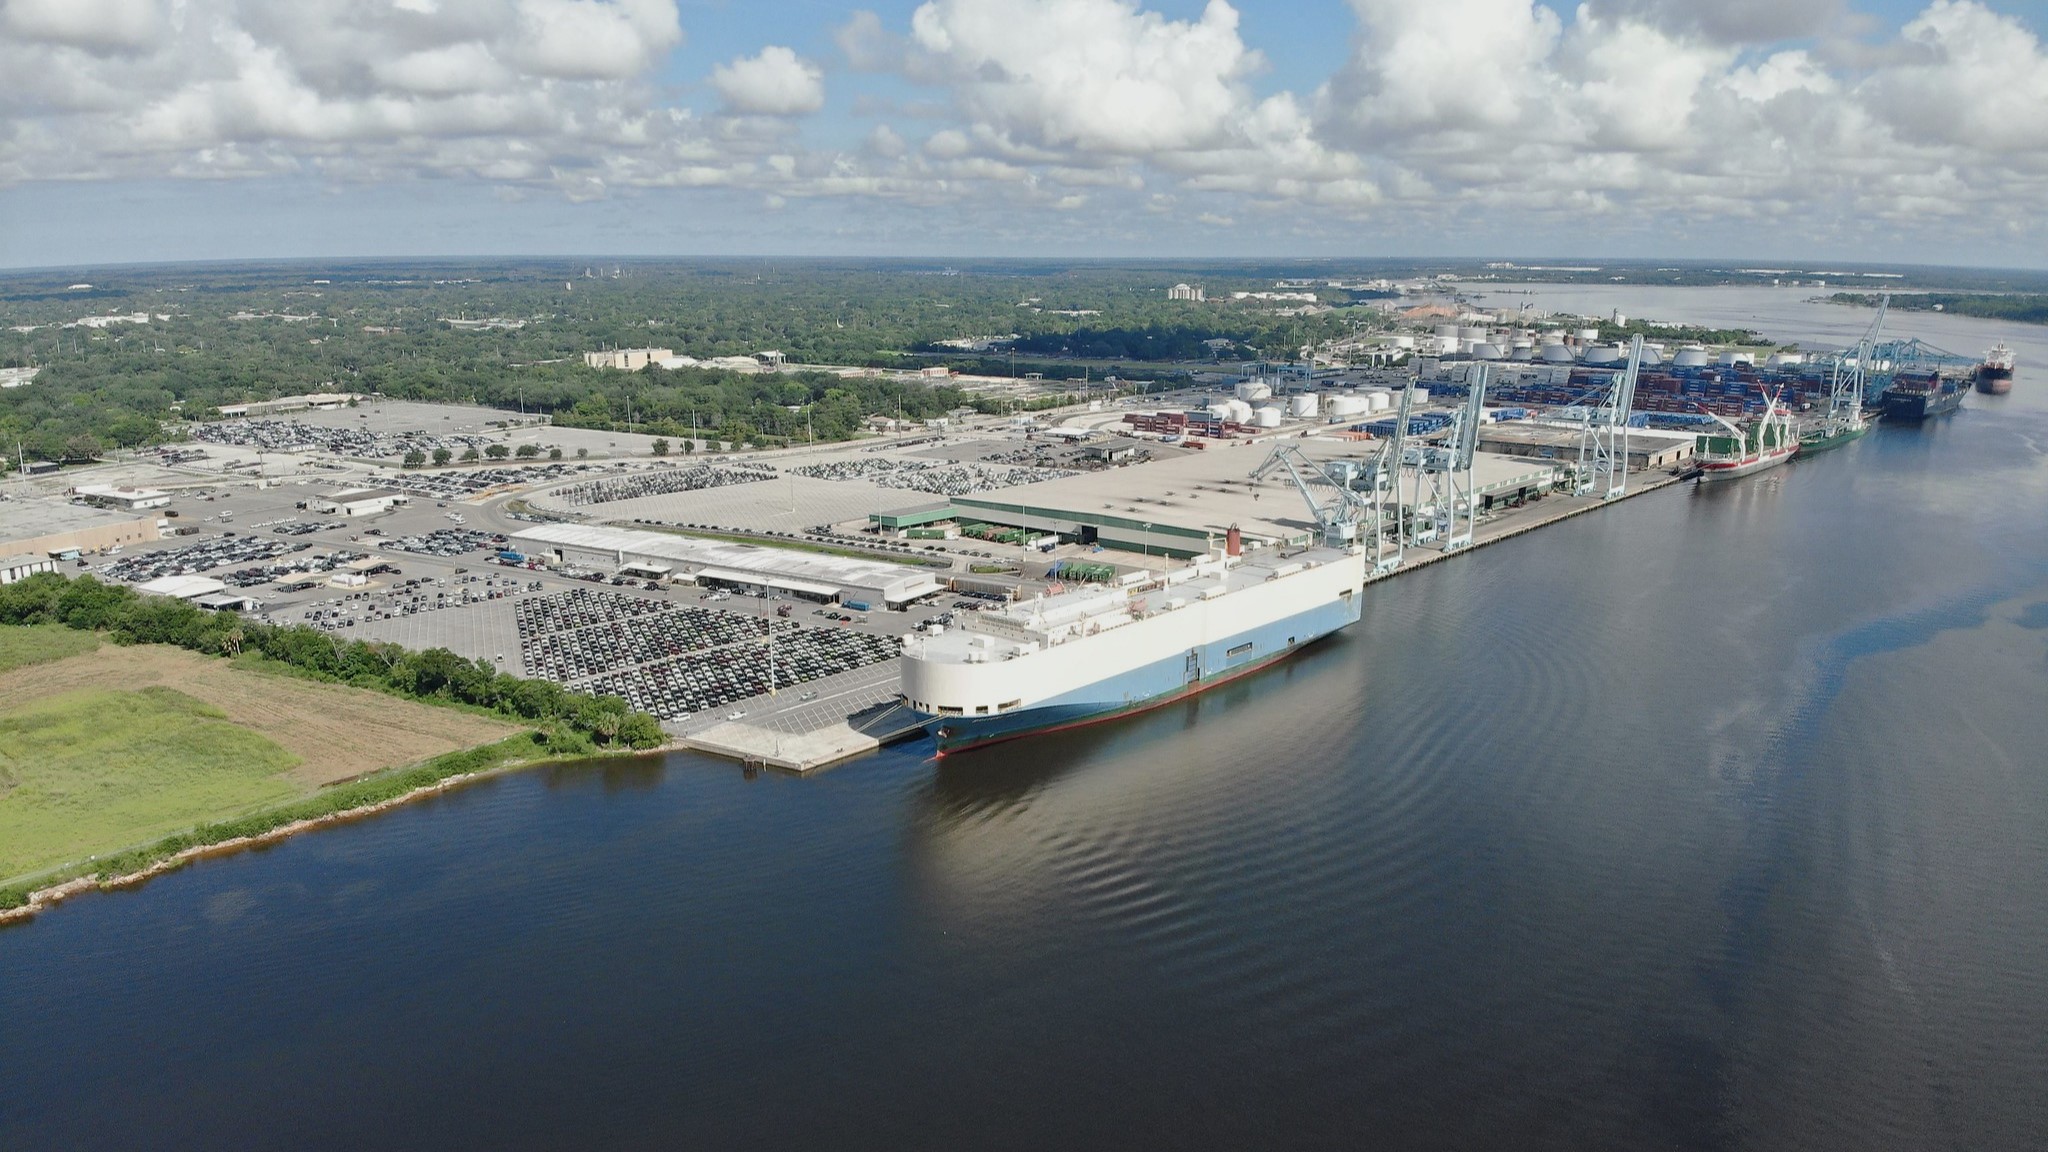 Featured image for “Jaxport marine company will triple its space”